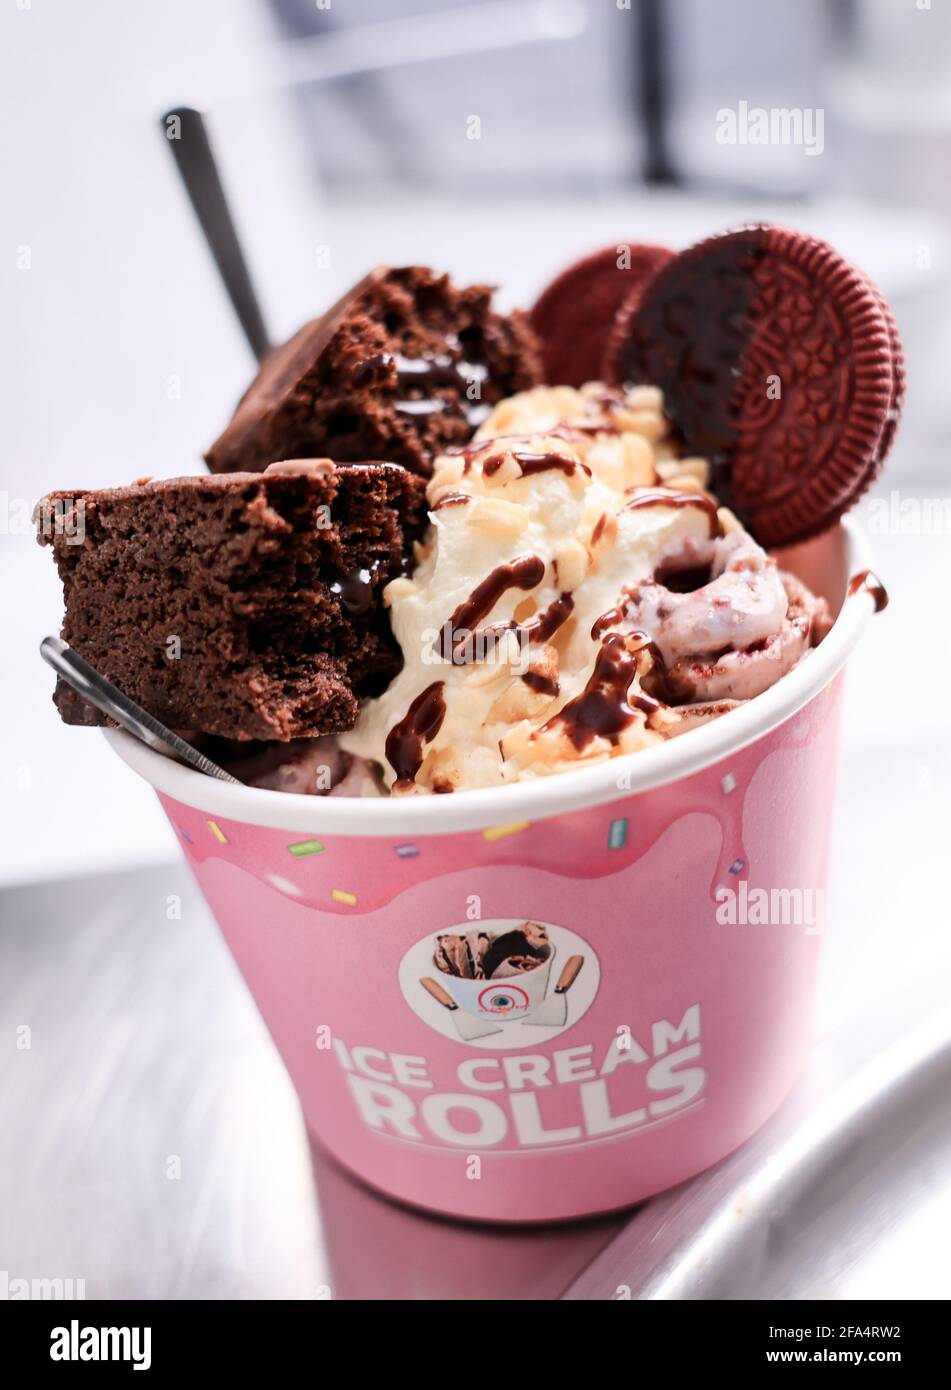 Hamburg, Germany. 19th Apr, 2021. A brownie & Oreo ice cream creation  stands on the frosting plate in the studio of Youtuber Gil Grobe. With his  unusual ice cream creations on the